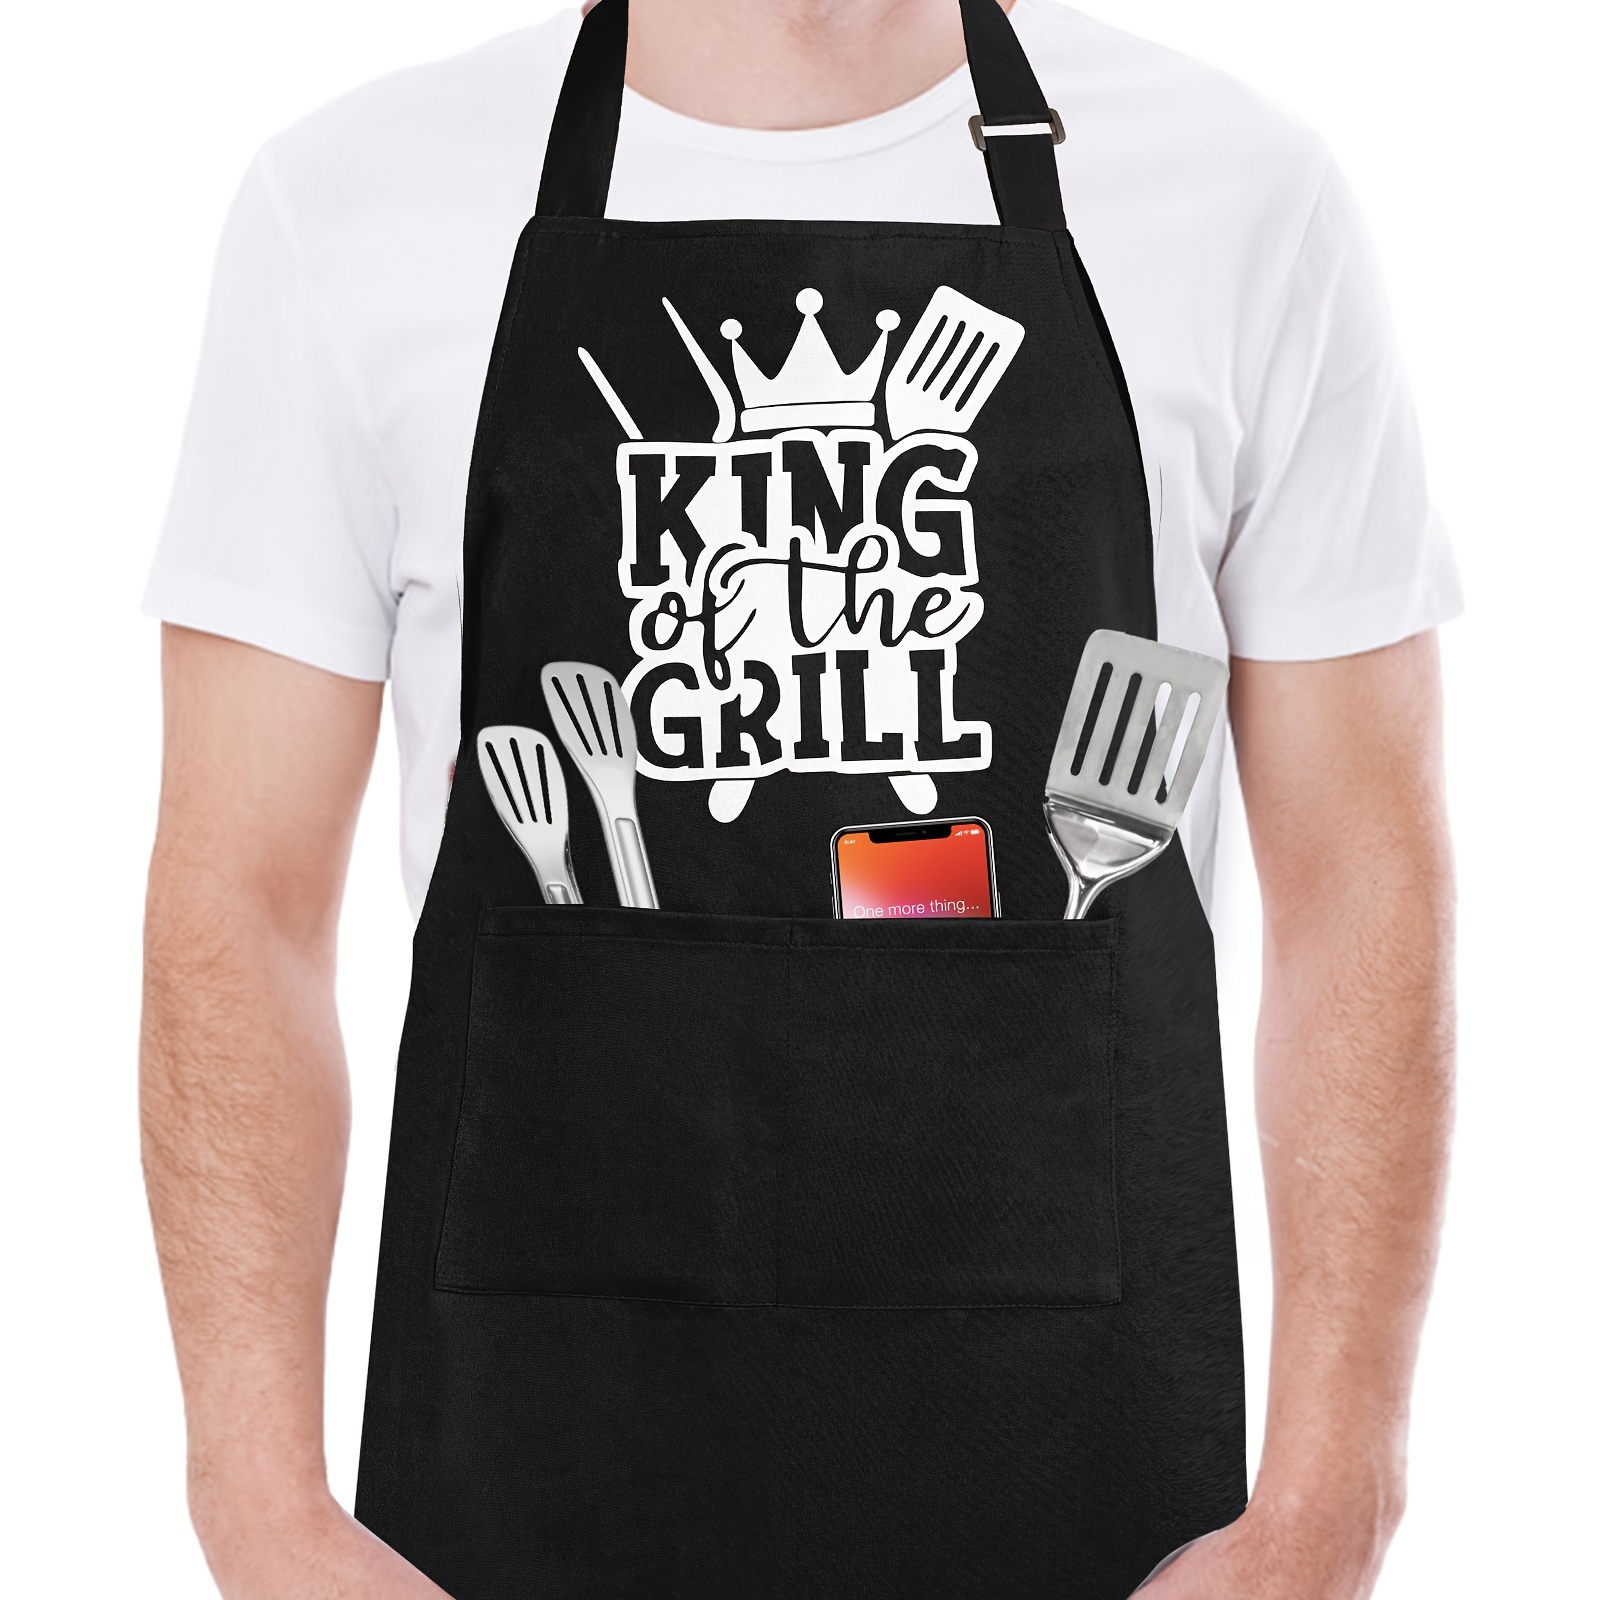 

Apron For Men, Grilling Bbq Apron With Pocket, Waterproof Chef Apron For Dad Gifts - King Of The Grill, Birthday Father's Day Christmas Gifts